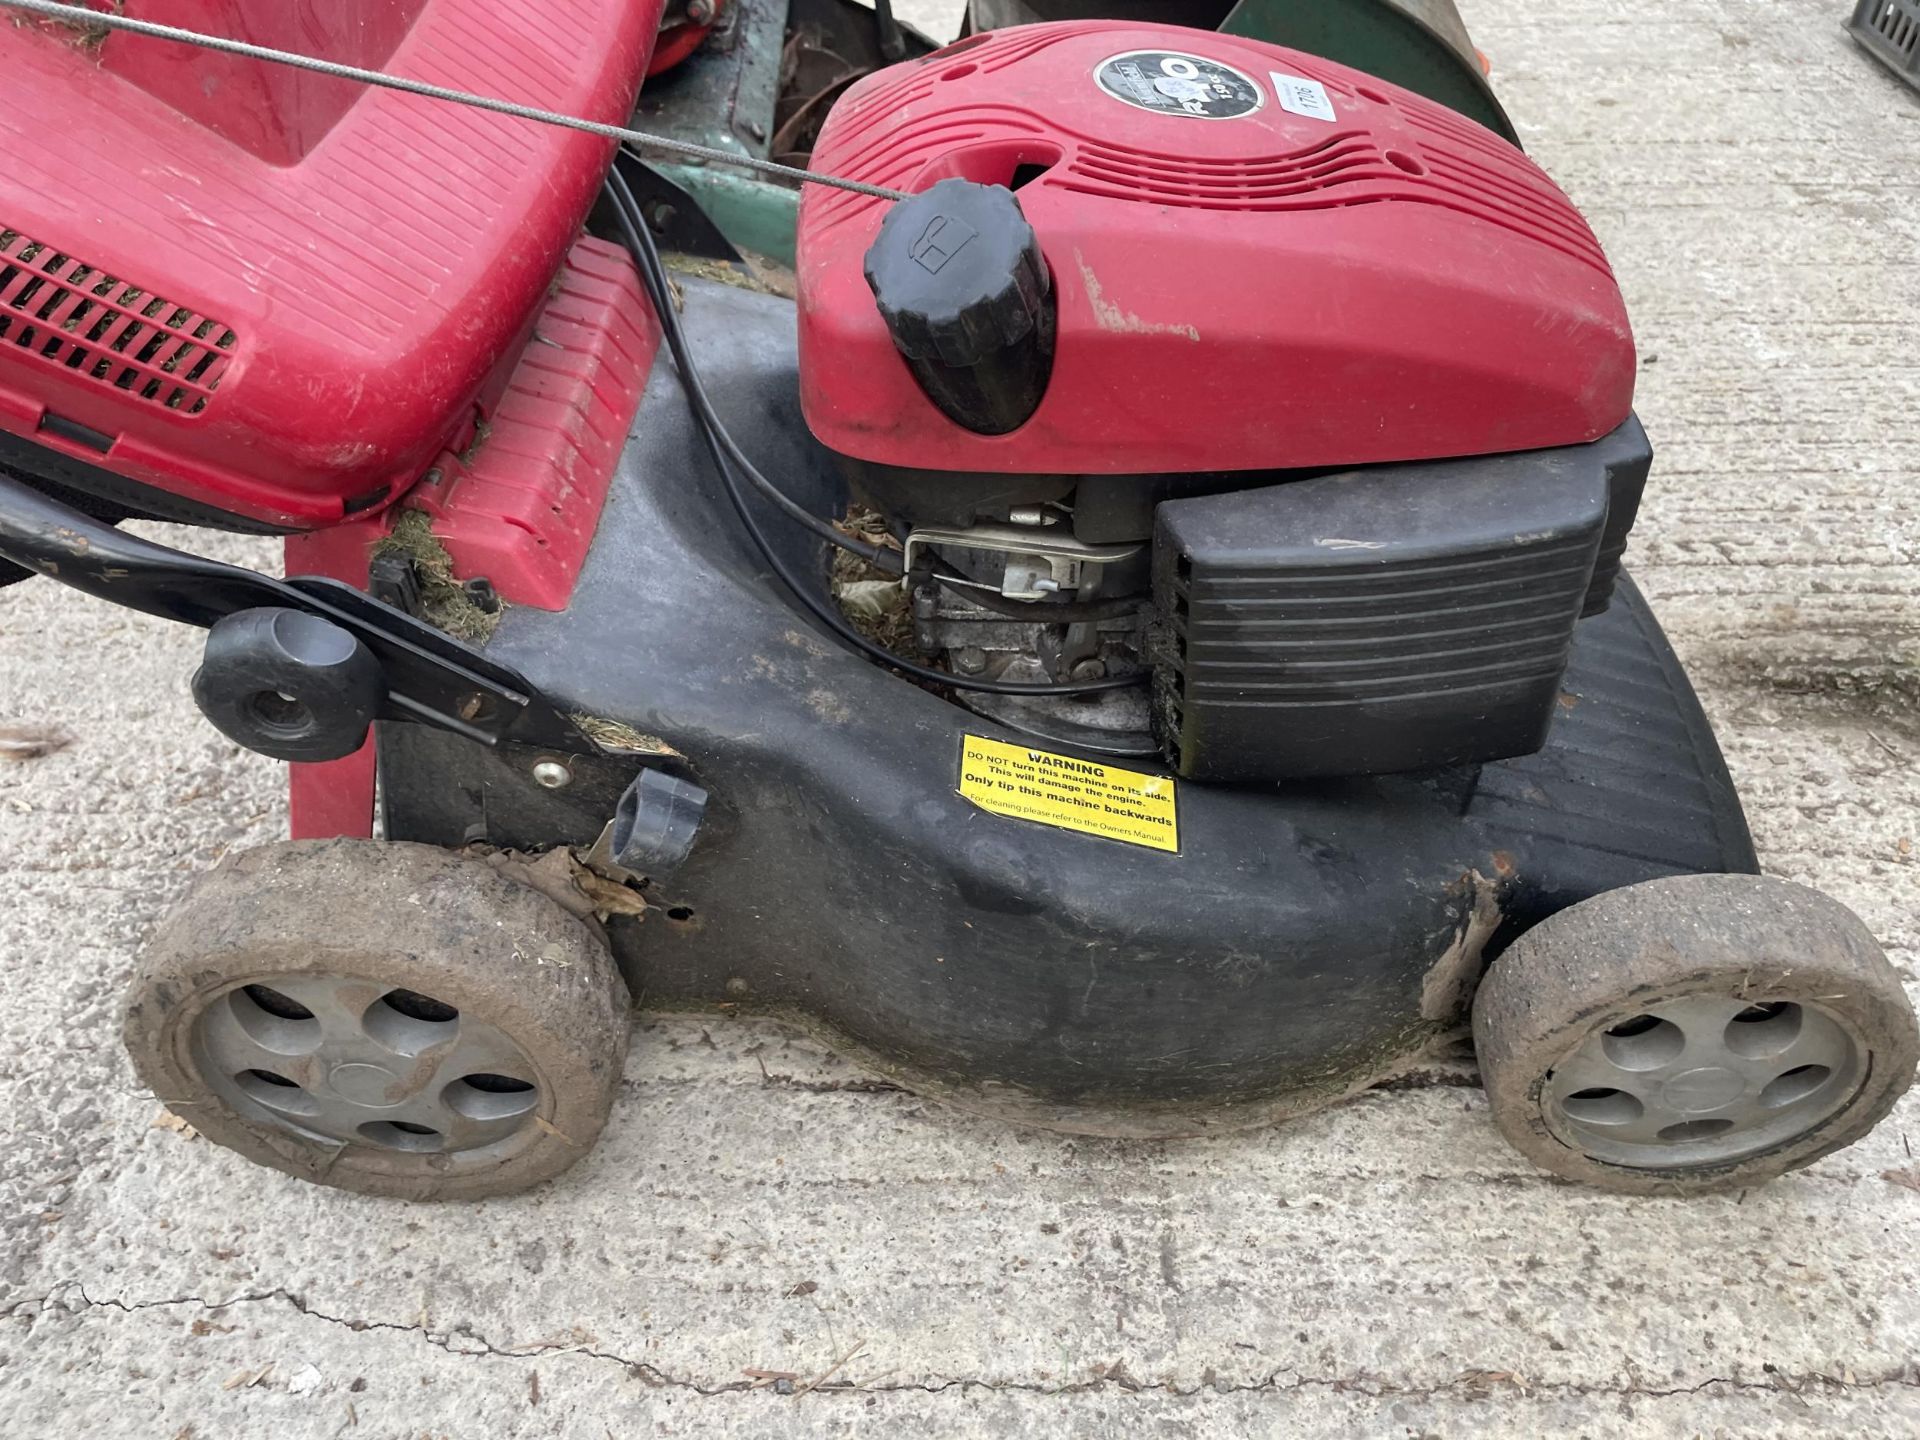 A MOUNTFIELD PETROL LAWN MOWER WITH GRASS BOX - Image 2 of 3